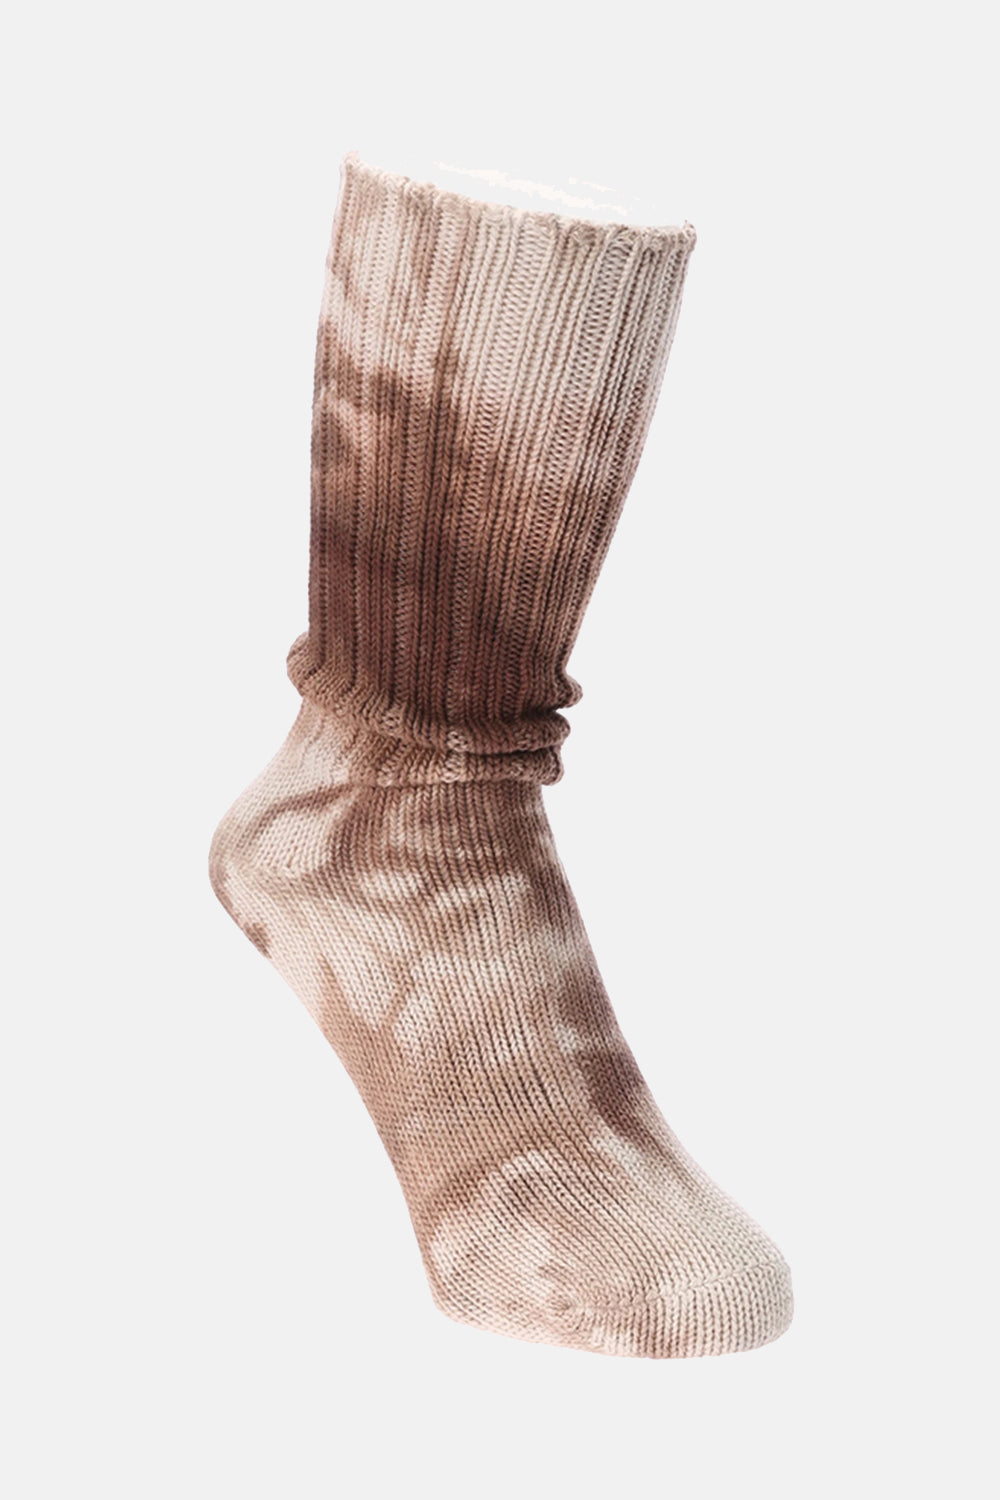 Anonymous Ism Uneven Dye Crew Socks (Brown)